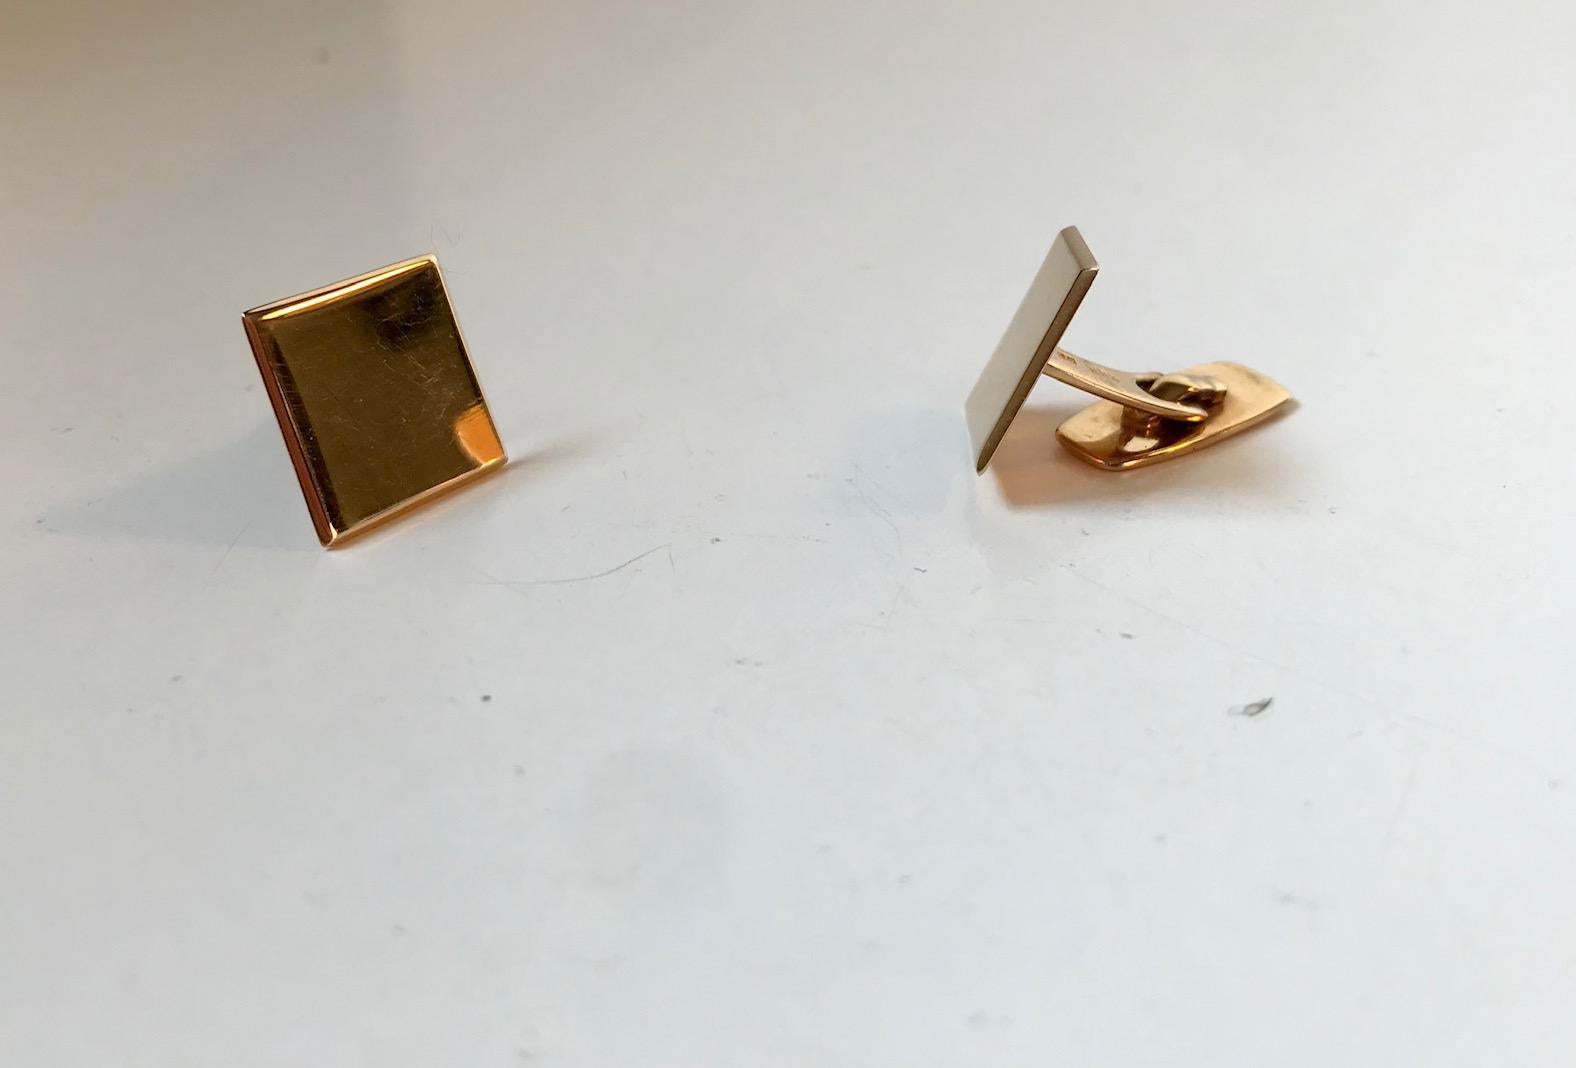 Square rounded of solid gold cufflinks made from 14-carat yellow gold. Nordic minimalism and purity comes alive in this subtle pair of vintage 1970s cufflinks. Manufactured and designed by Randers Sølv during the 1970s. Both imprinted with hall- and